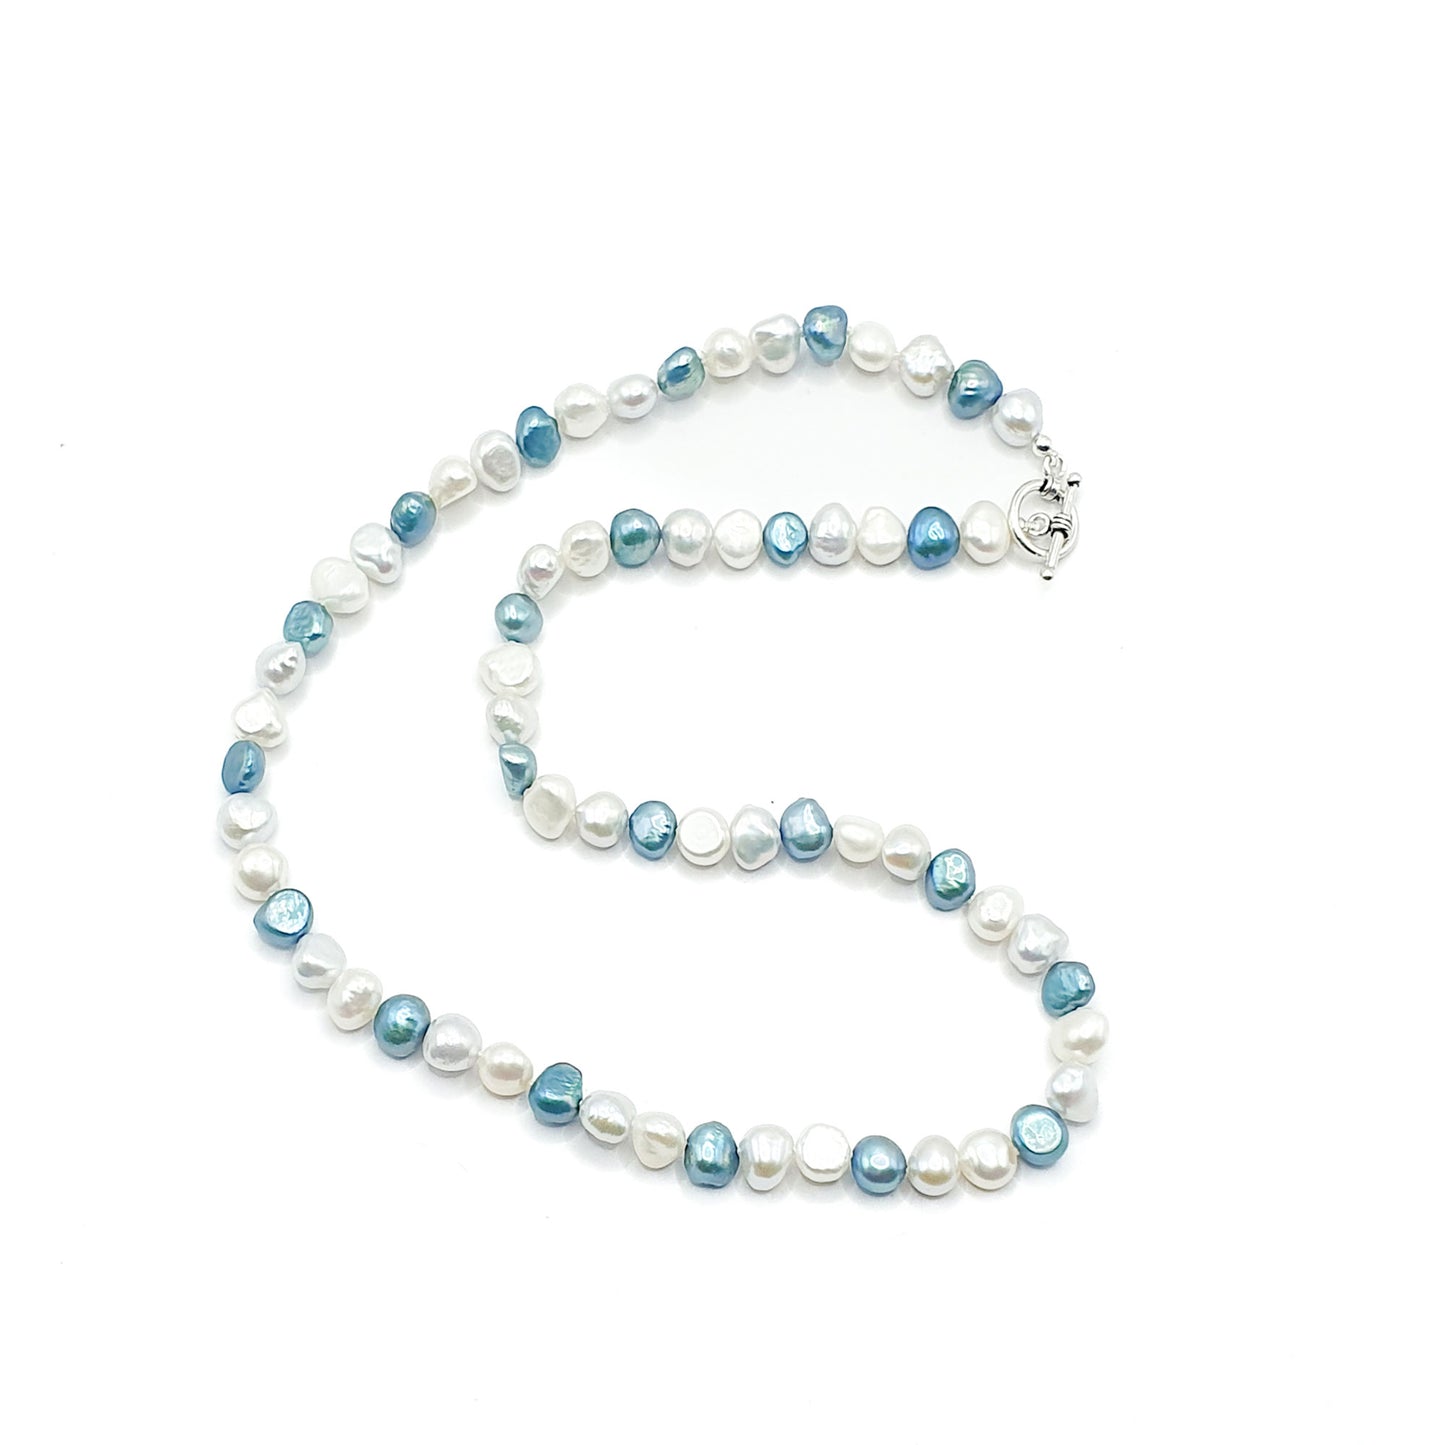 Freshwater pearl mix necklace of white, silver and blue pearls on a silver clasp